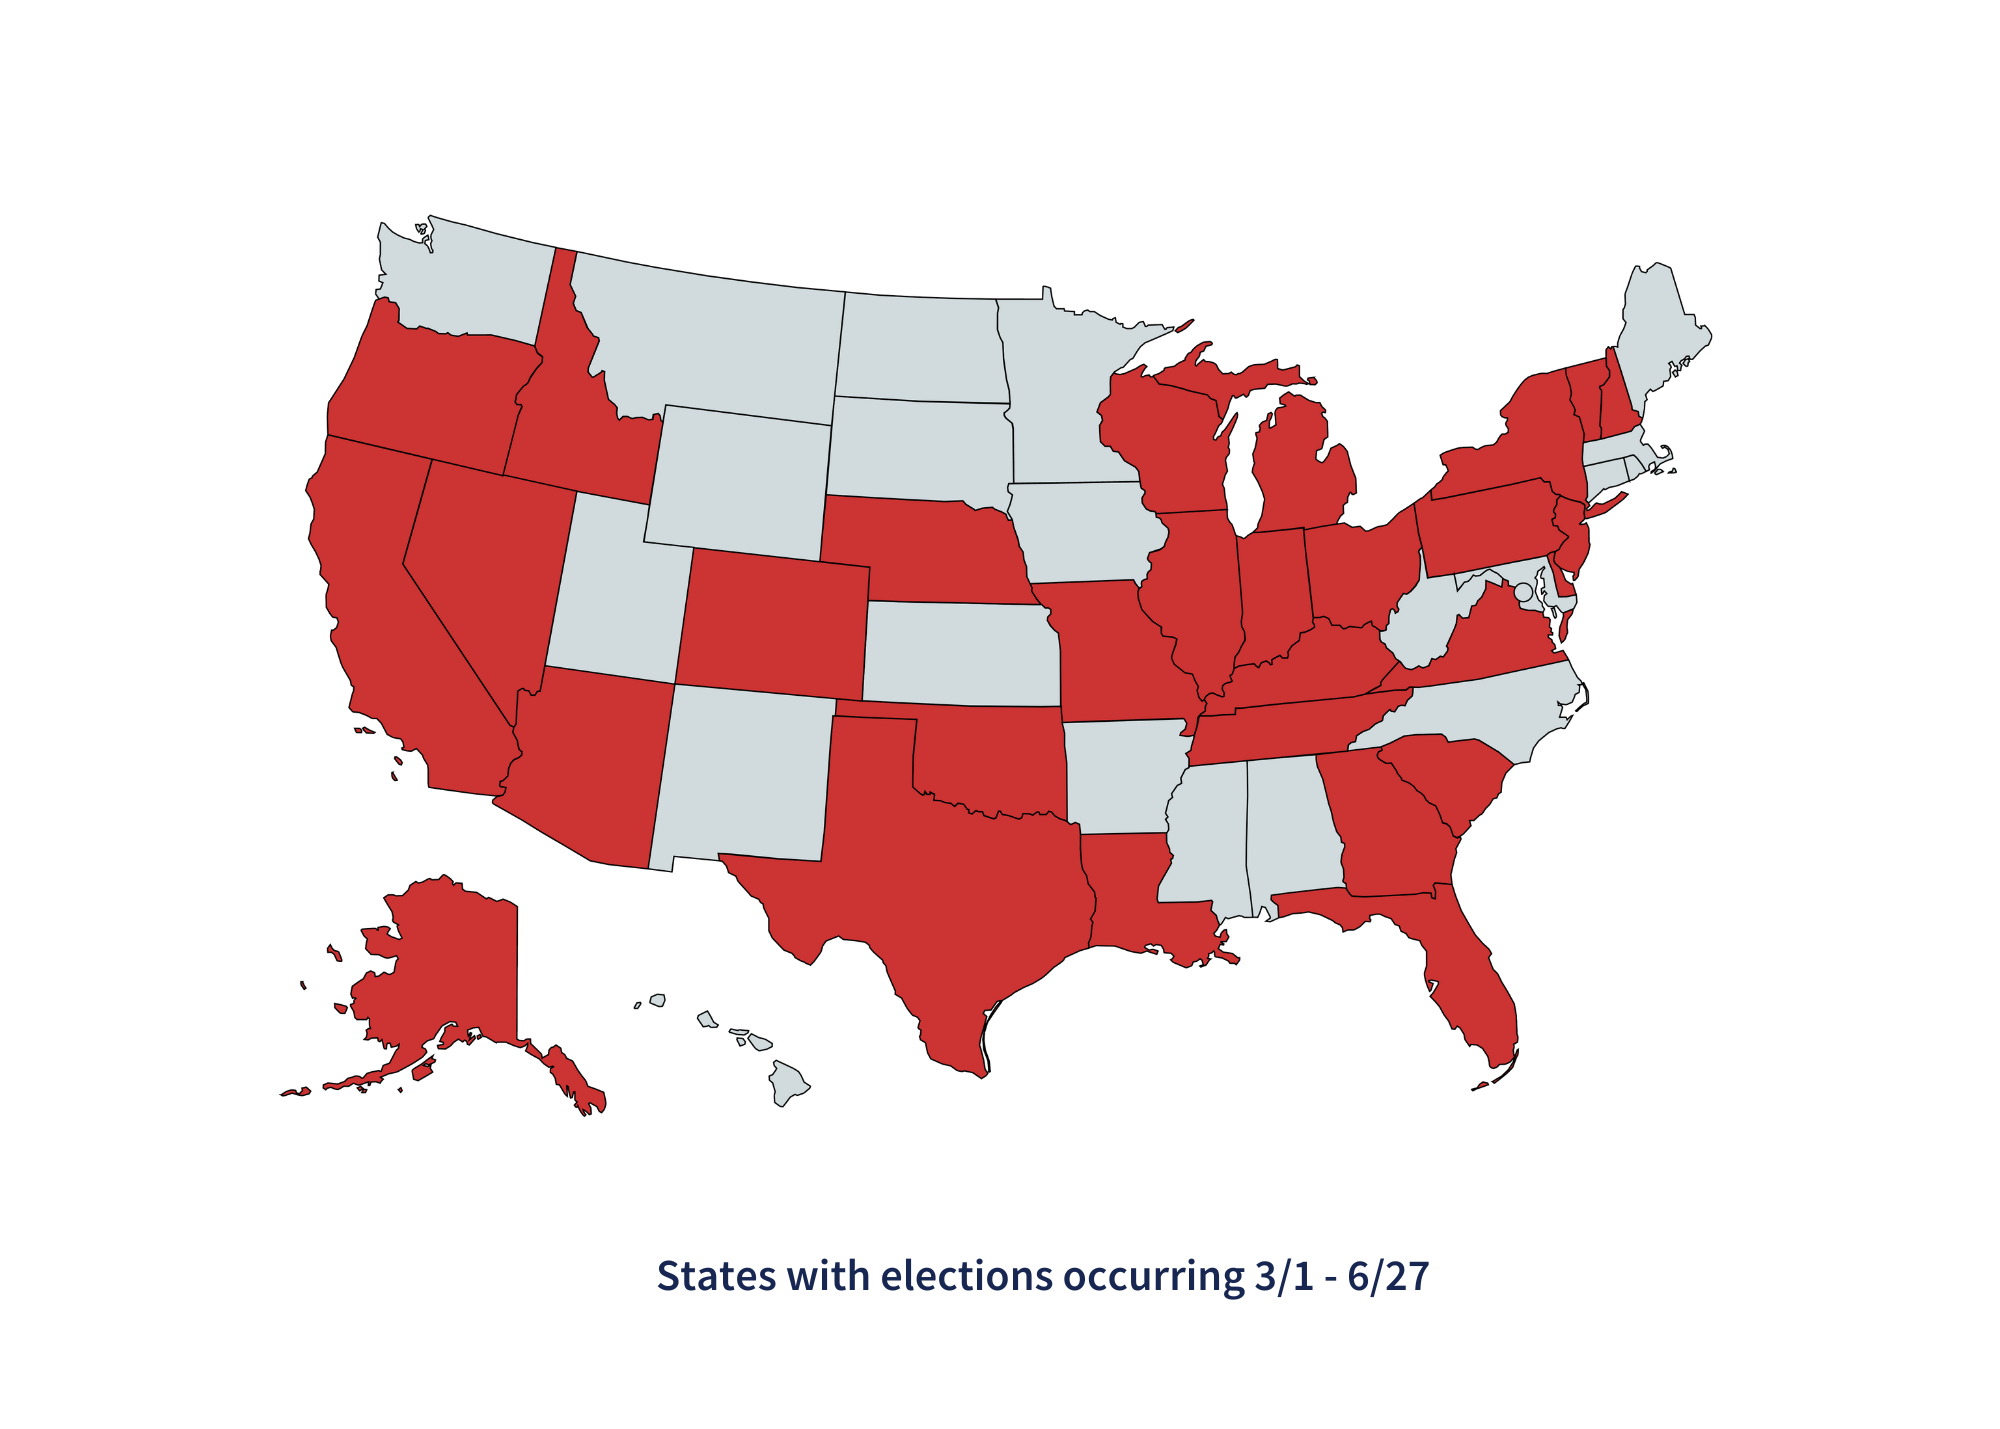 Graphic of states with elections occurring between March 1 and June 27.